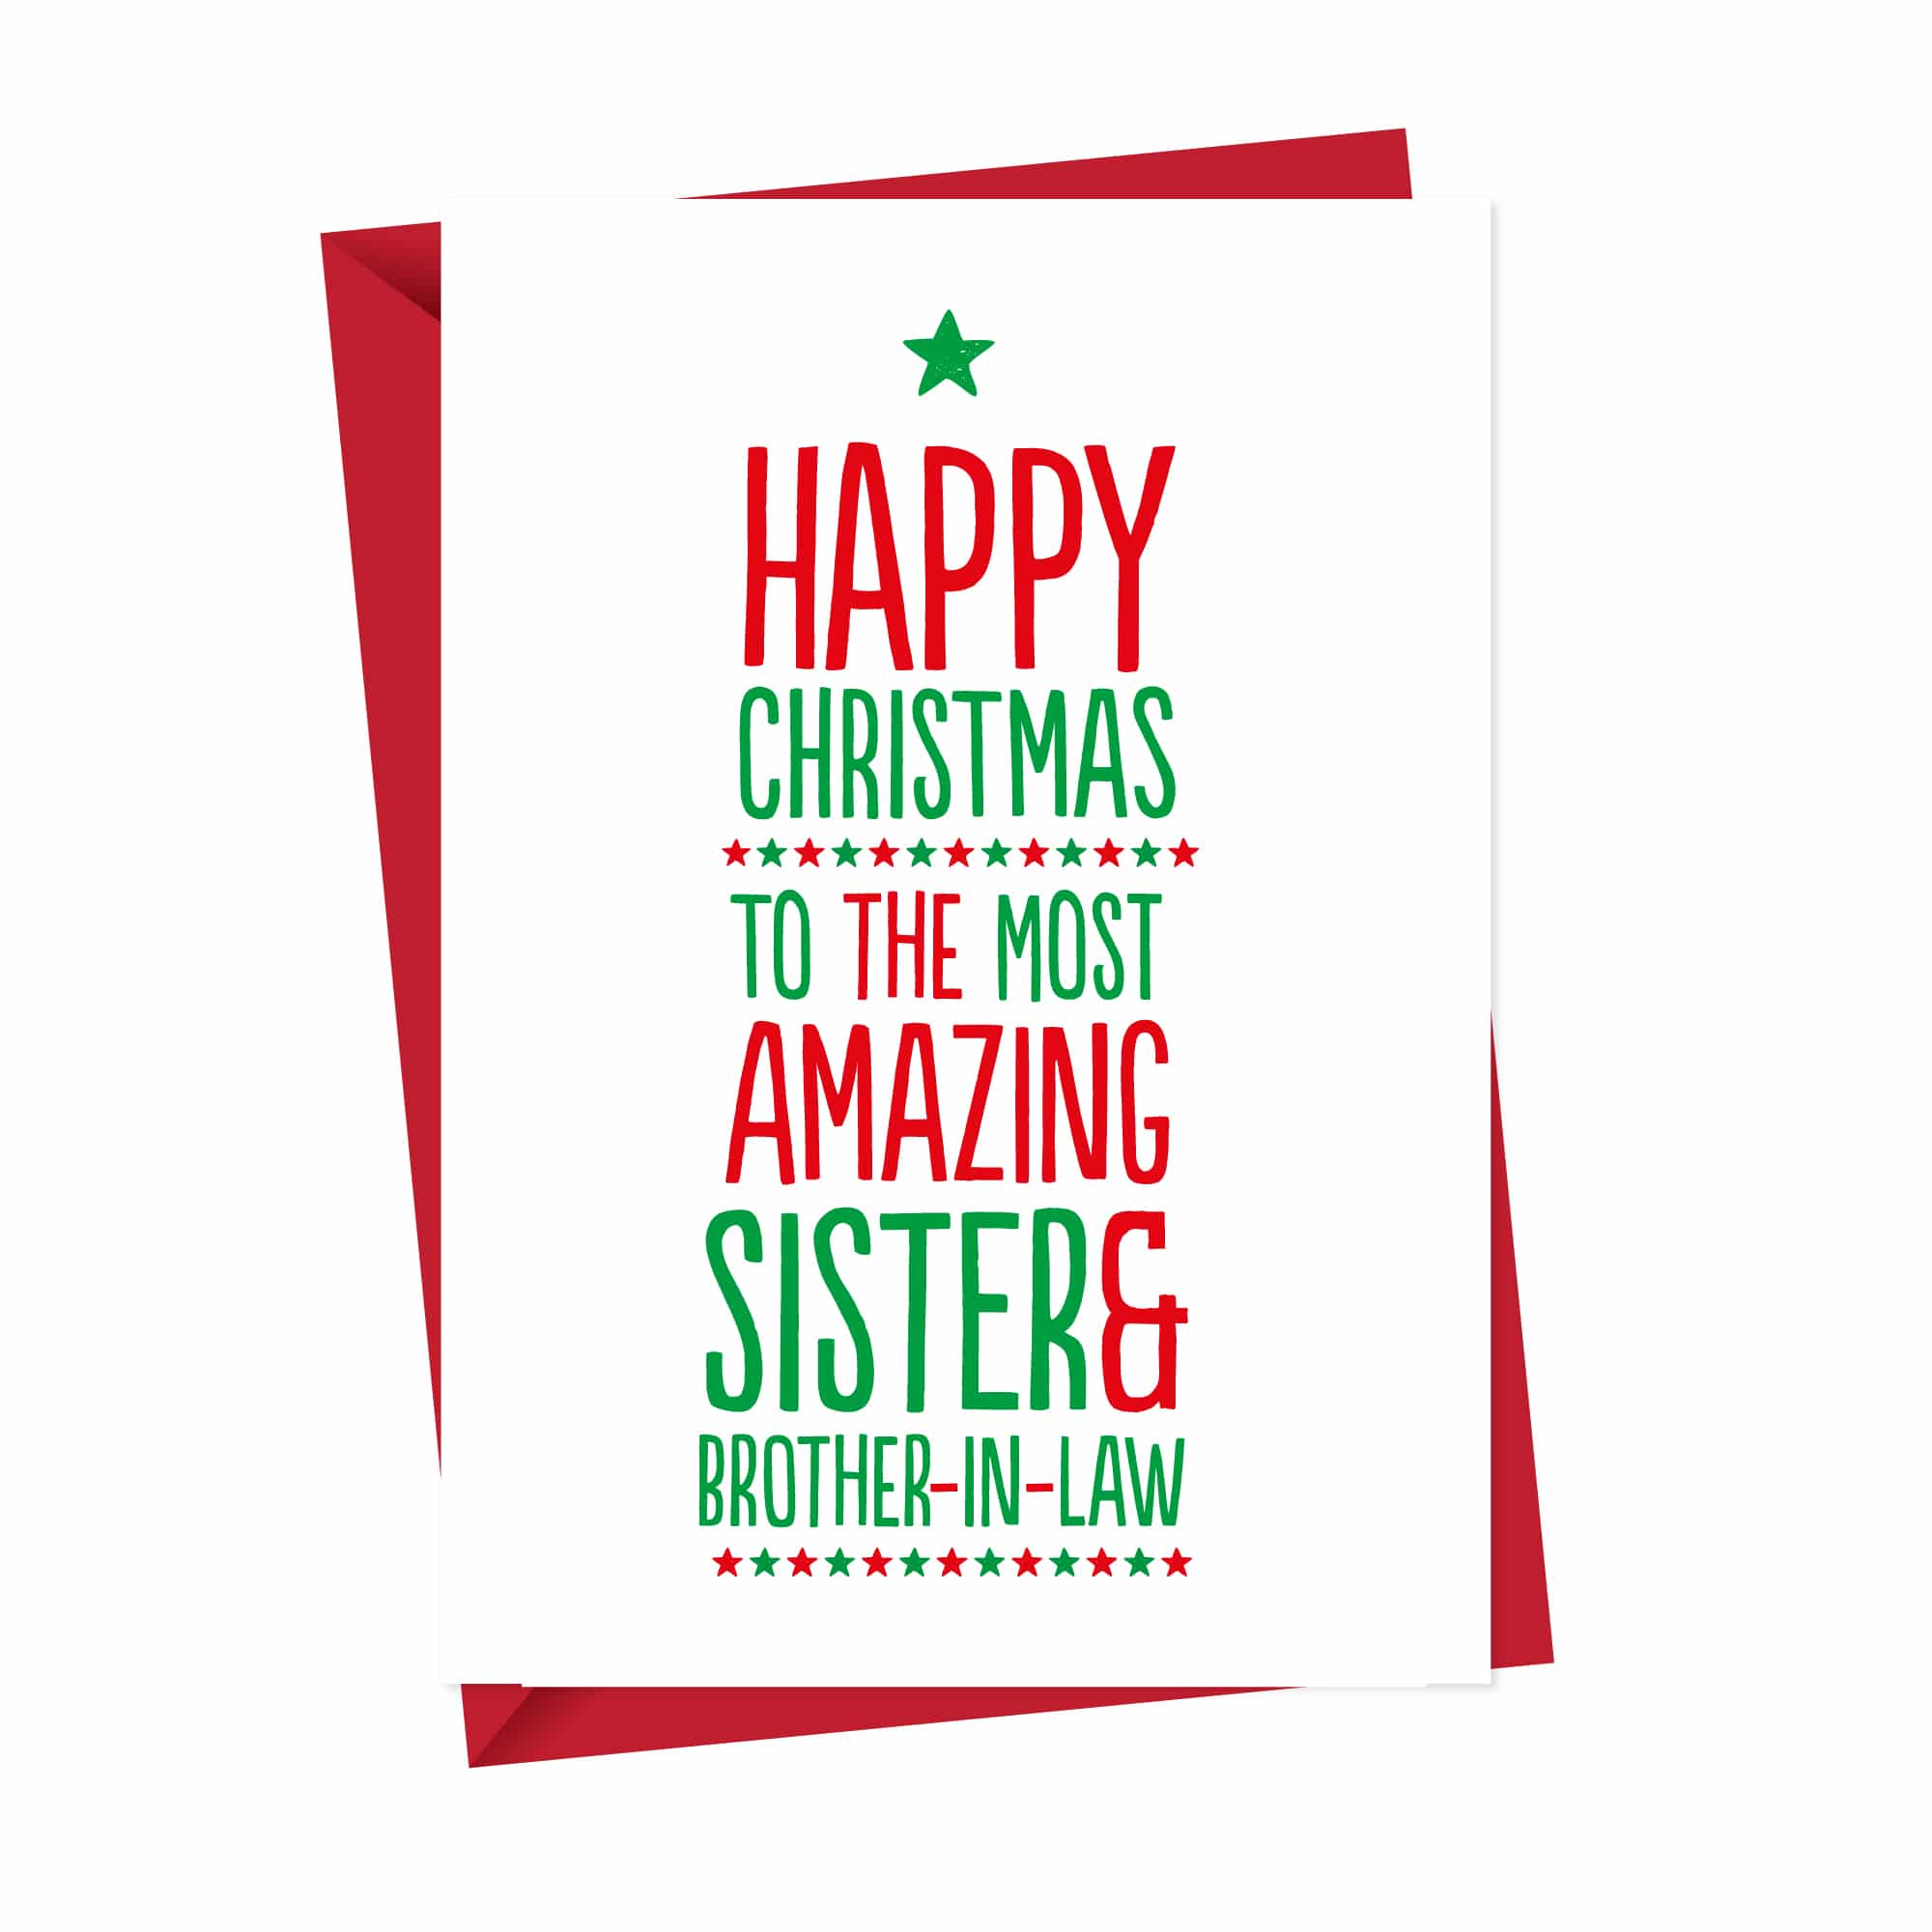 Amazing Sister and Brother in law Xmas Card